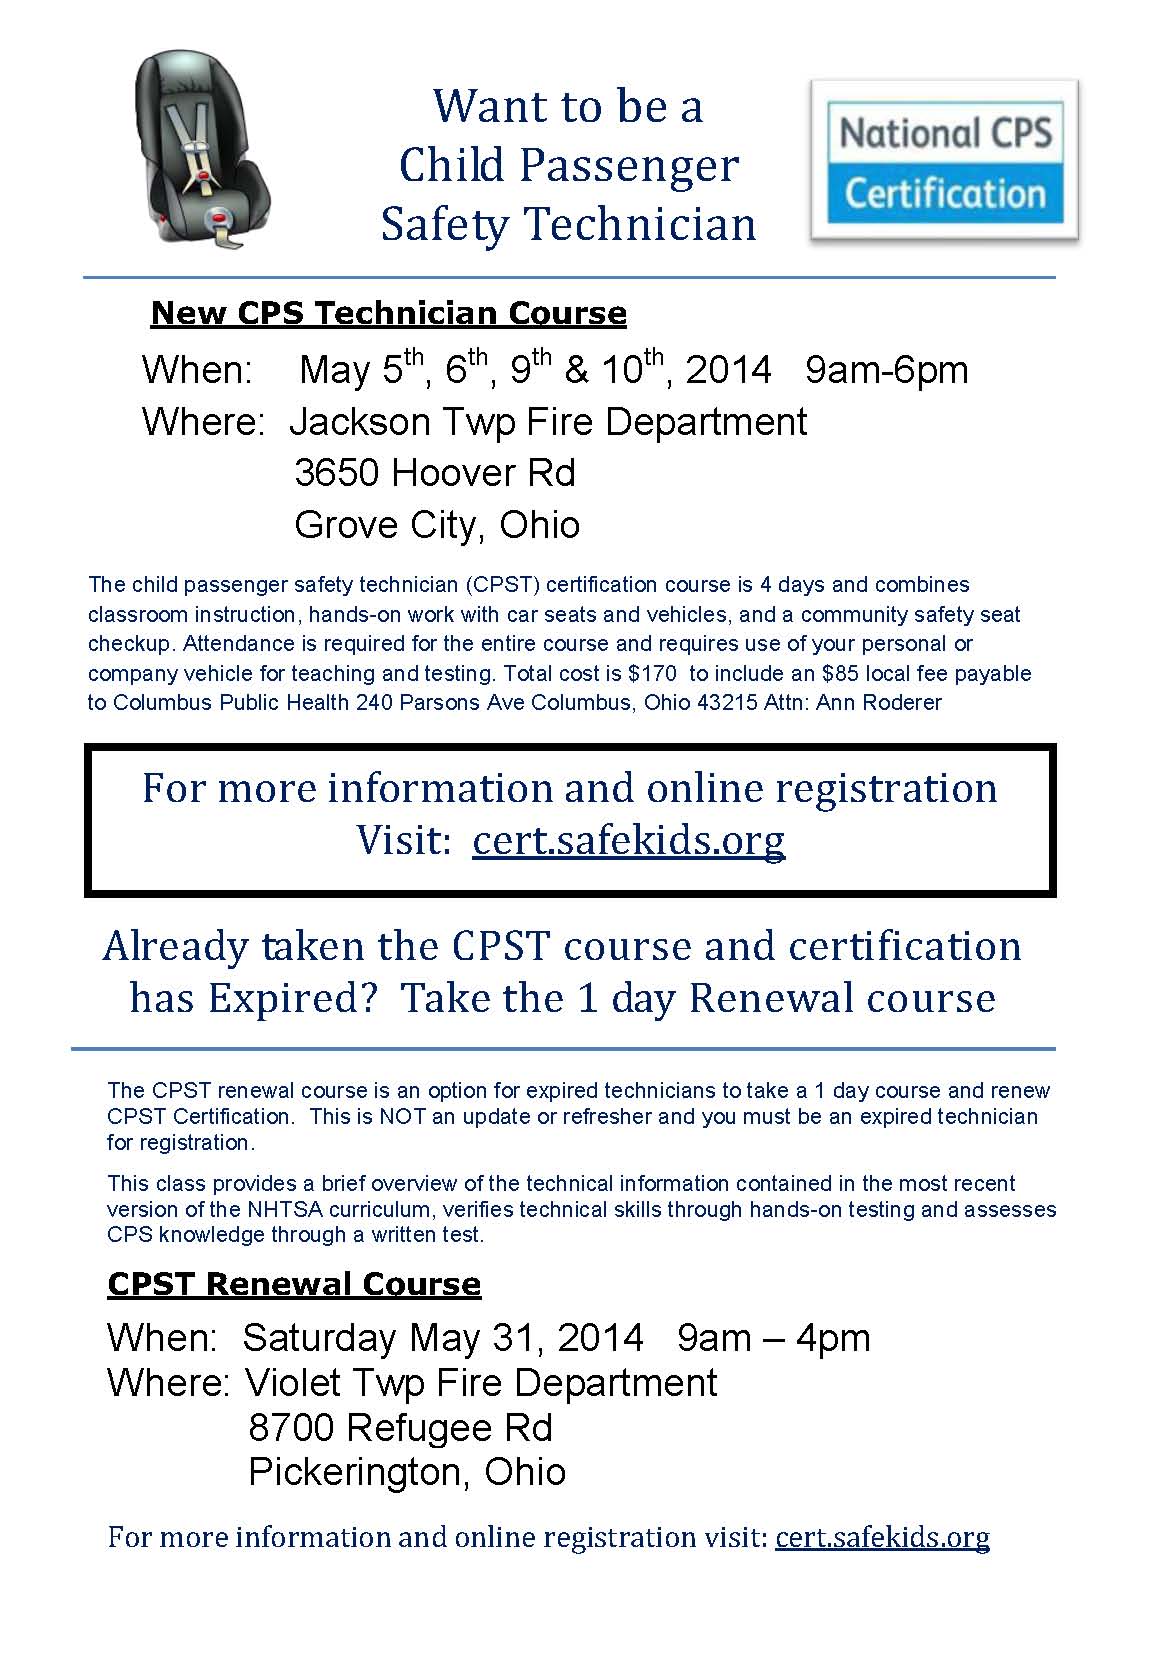 May-CPST-Course-Information.jpg